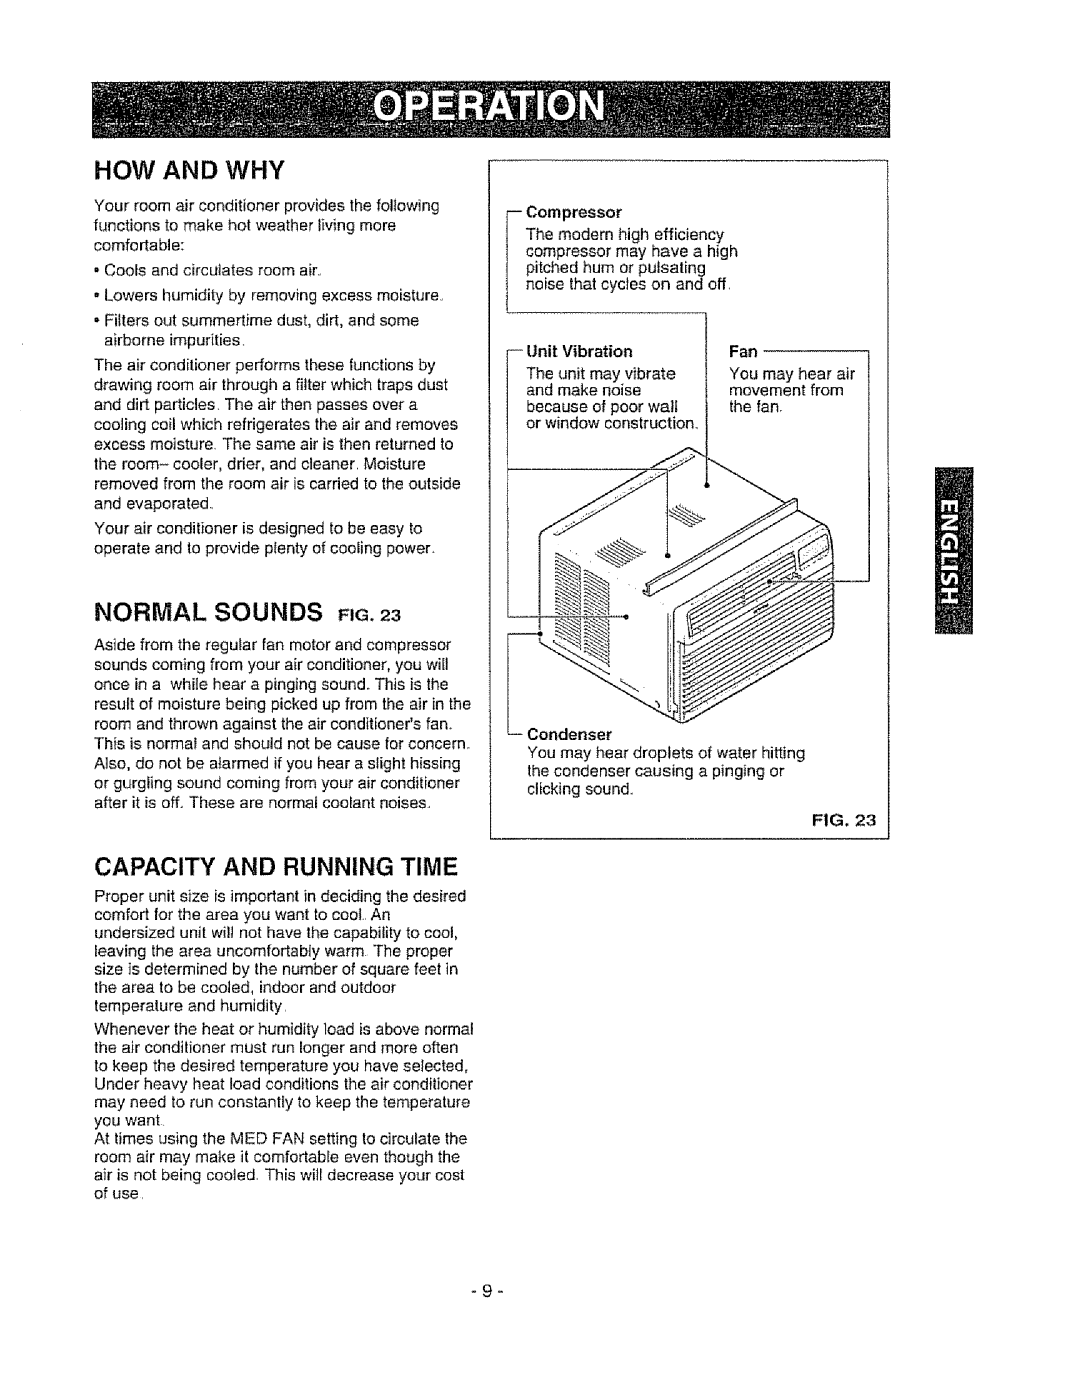 Kenmore 580. 72089 owner manual How And Why, Capacity And Running Time, Normal Sounds Fig, Compressor, Unit Vibration 